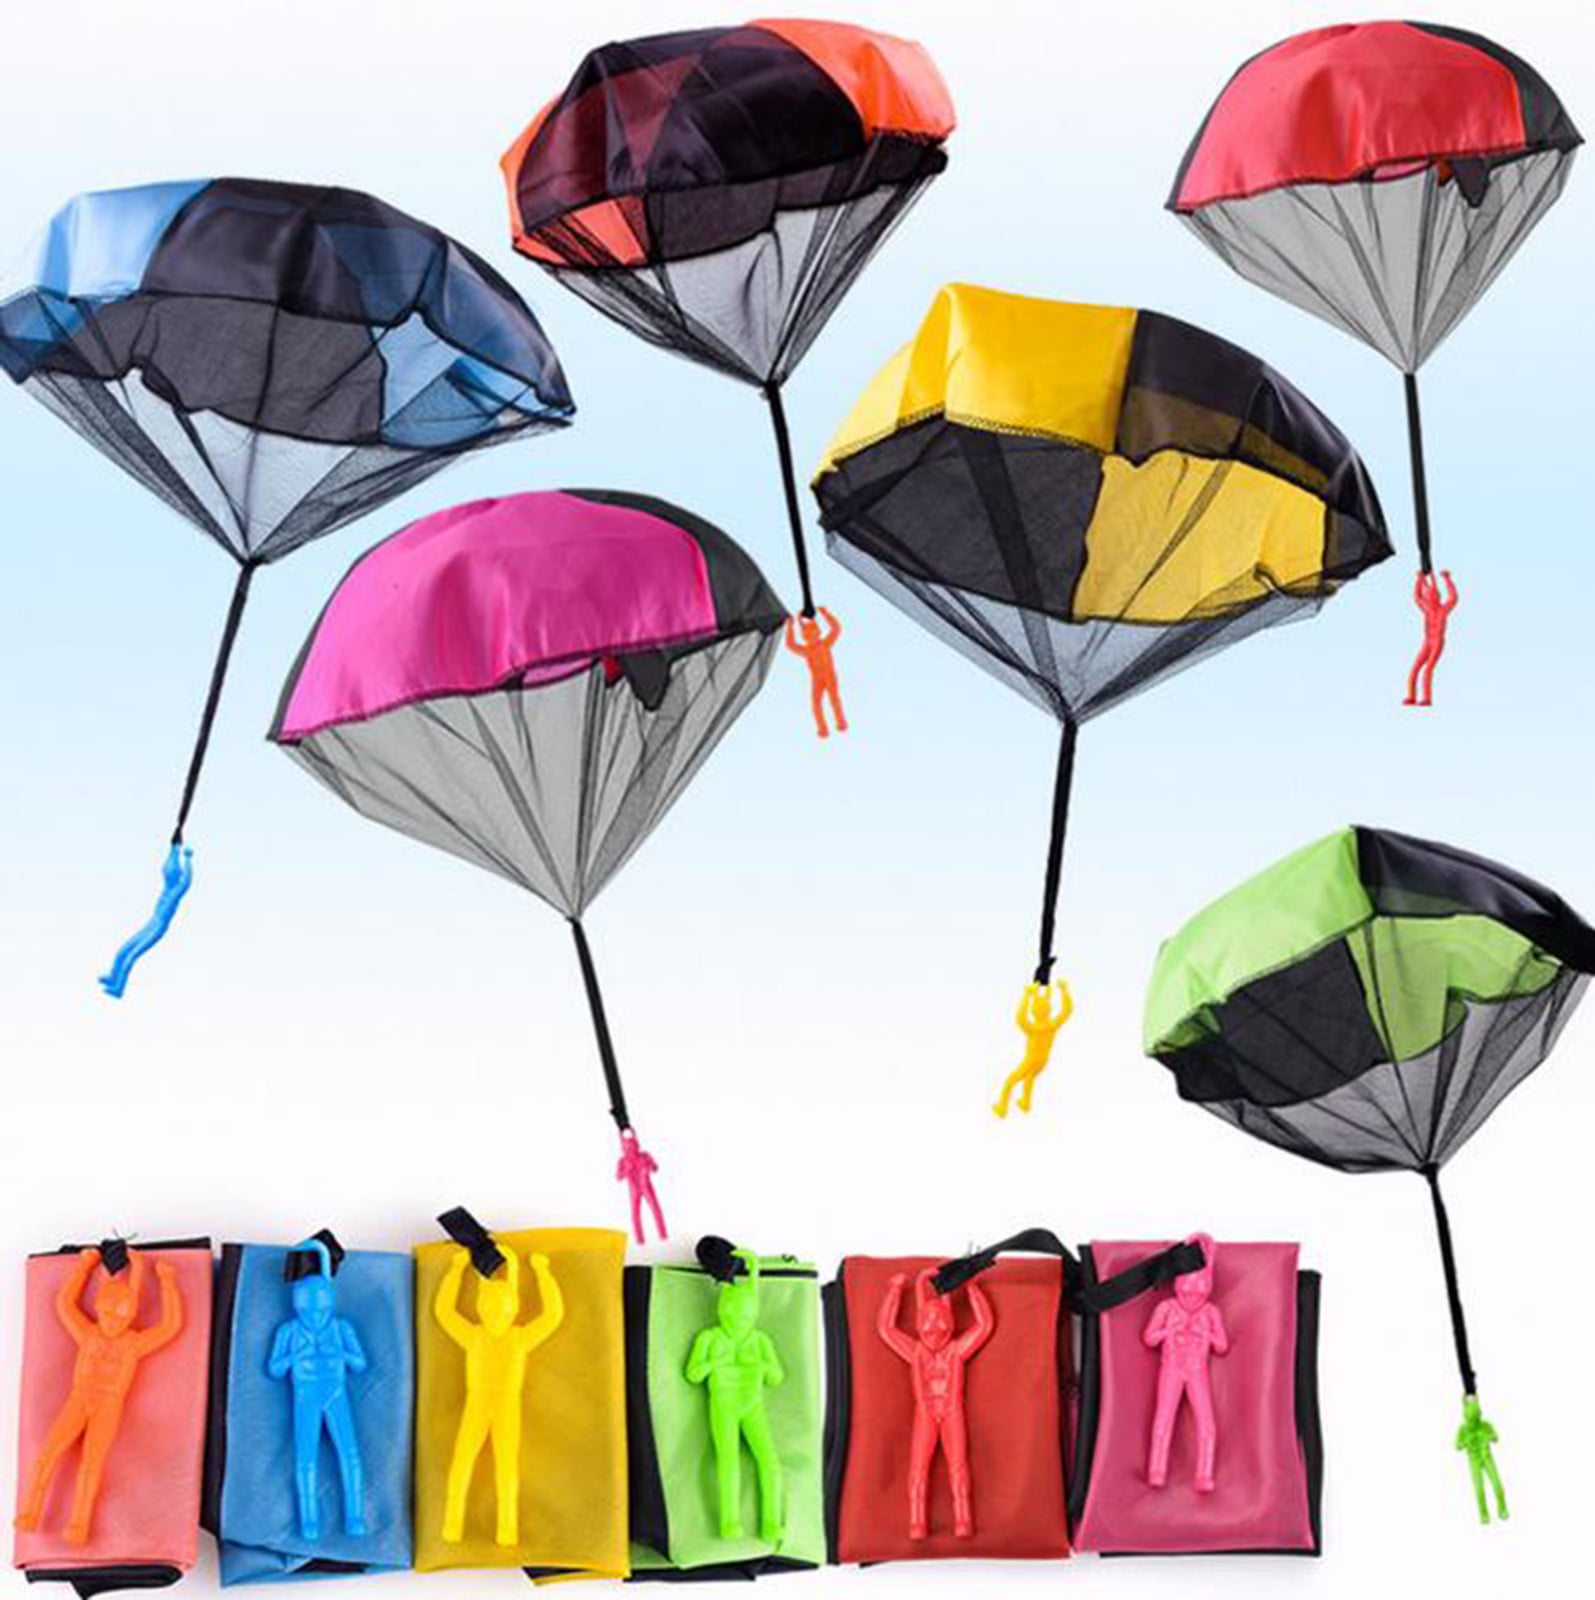 Not essential parachute Describe Swingin' Gold New Year's Eve Party Kit for 50 People - Walmart.com